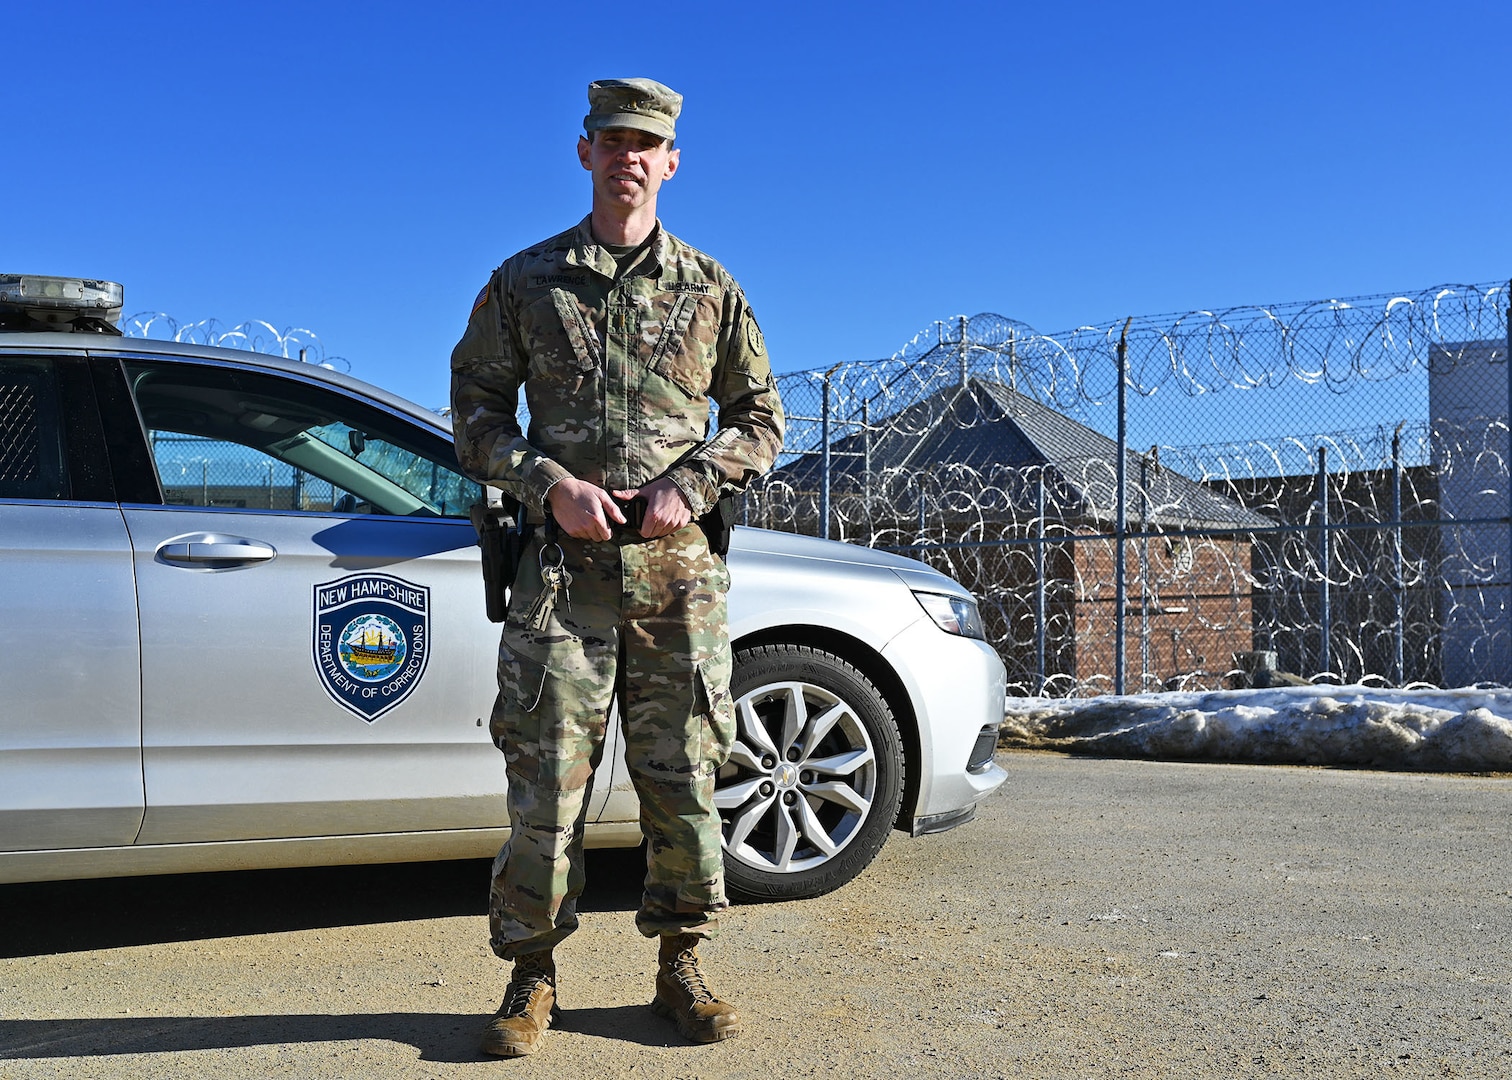 New Hampshire National Guard 1st Lt. James Lawrence, a military police officer with the 237th Military Company, with his issued patrol car on the perimeter of the N.H. State Prison for Men in Concord, N.H., on Jan. 10, 2021. Lawrence is one of 20 Guard members filling in at the prison due to a shortage of corrections officers caused by COVID-19.